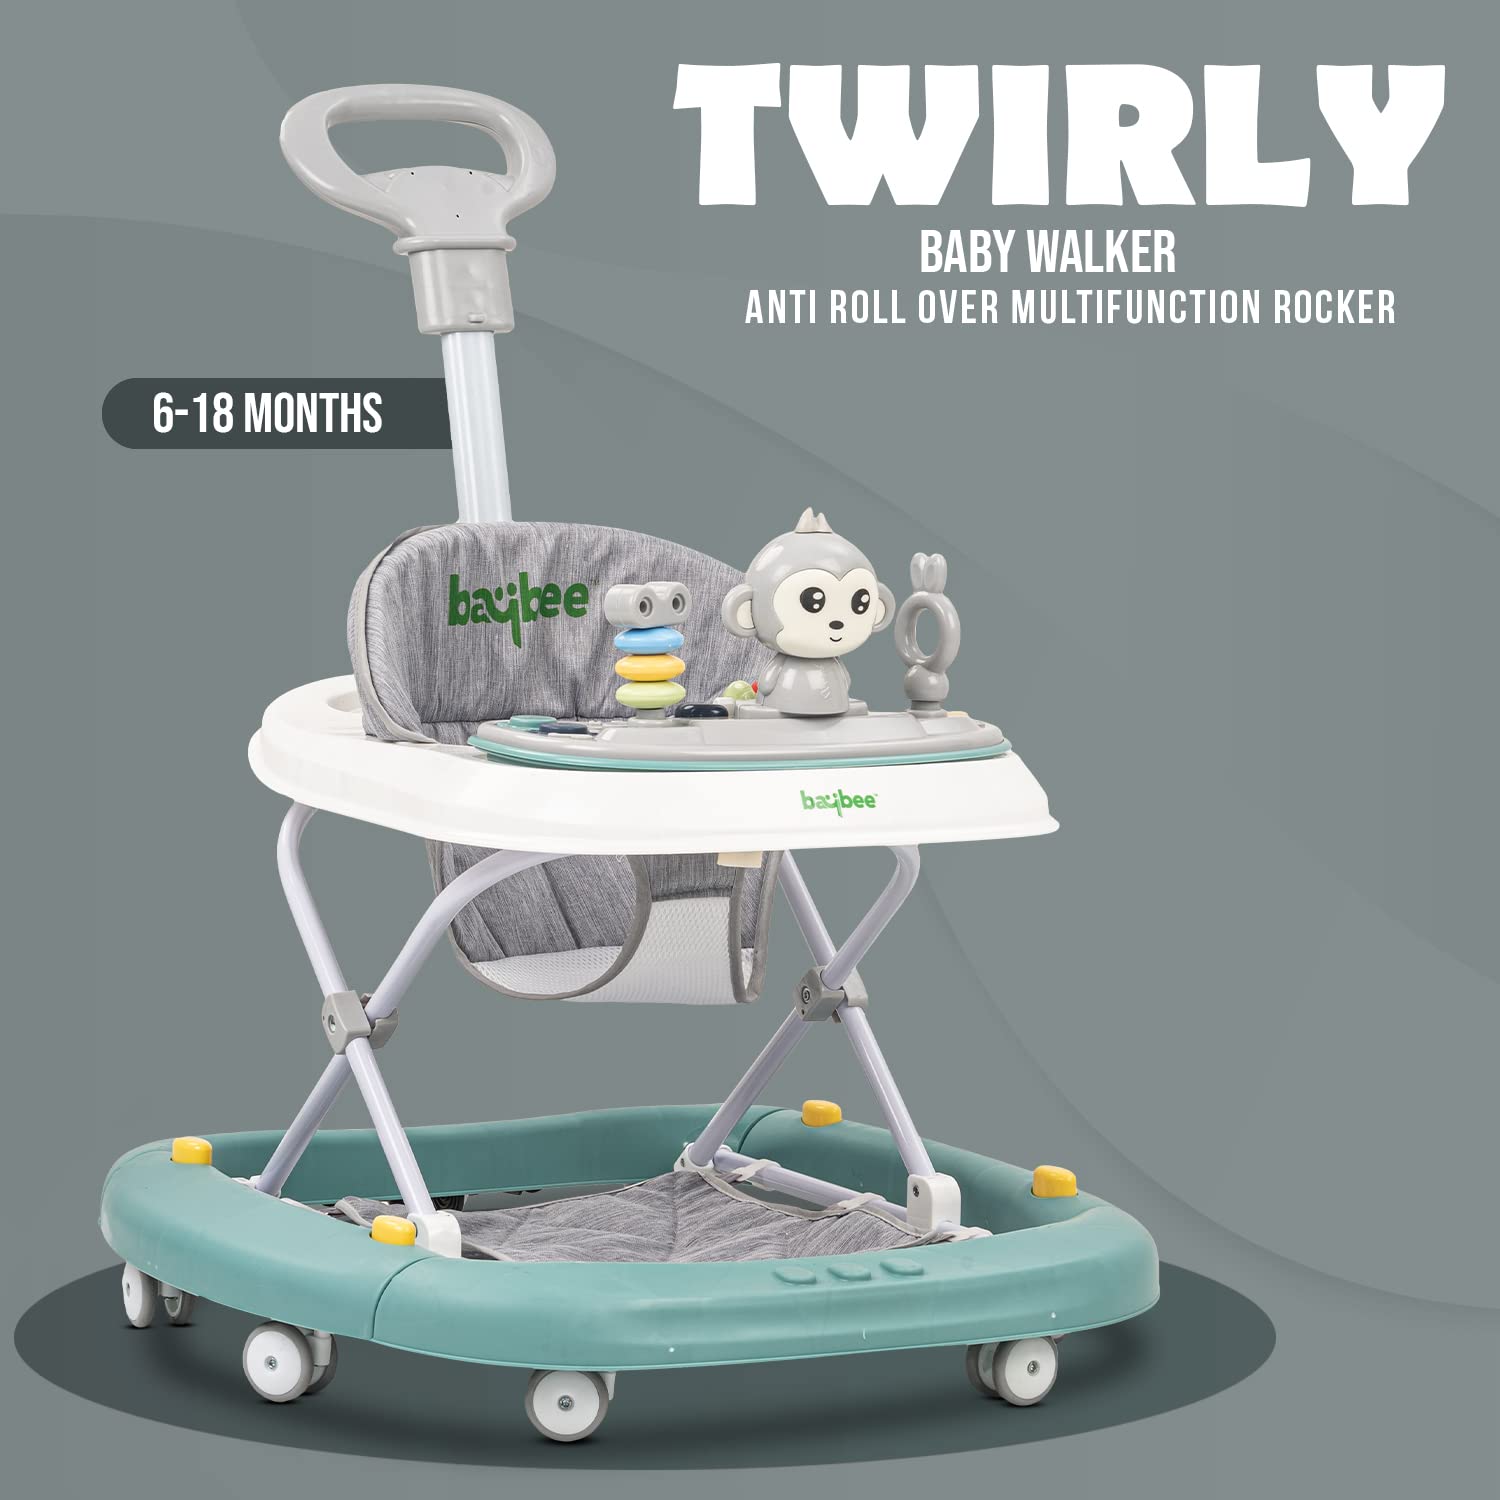 Baybee Baby Walker for Kids, Round Kids Walker with Rocker, Parental Handle, 4 Seat Height Adjustable | Activity Walker for Baby with Musical Toy Bar | Walker Baby 6-18 Months Boy Girl (Green)